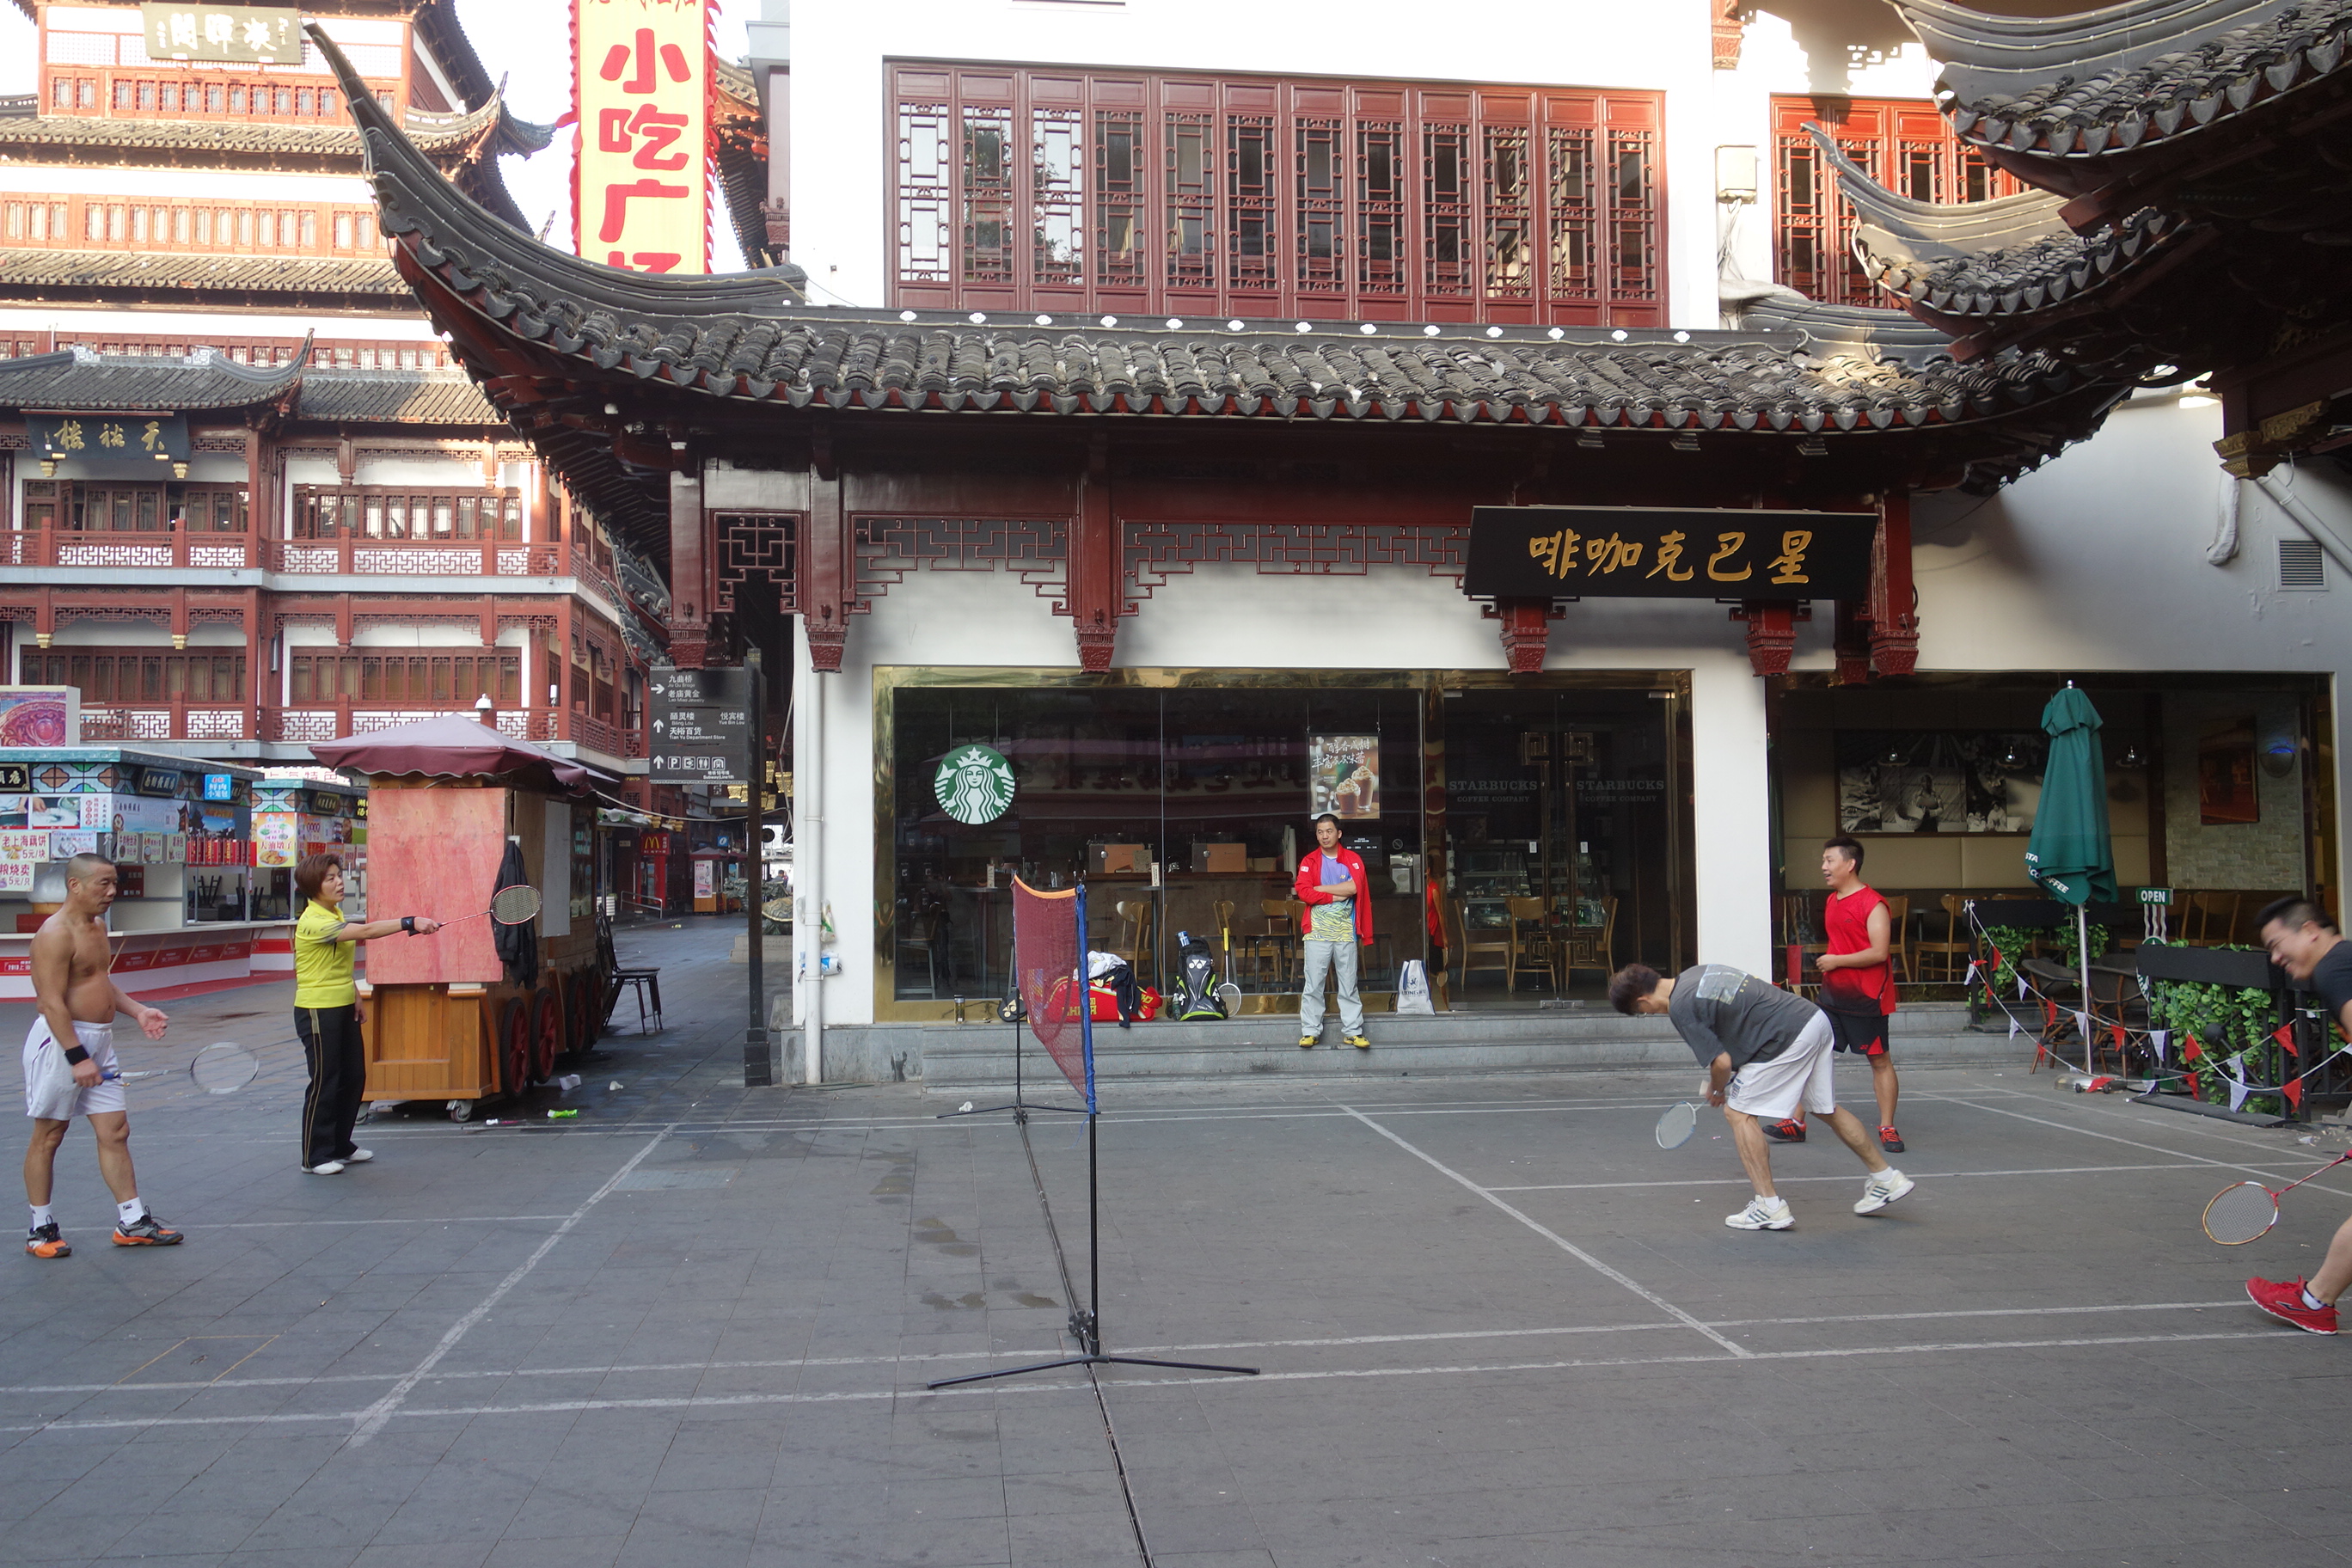 One of my favorite sites from Shanghai: badminton in front of Starbucks